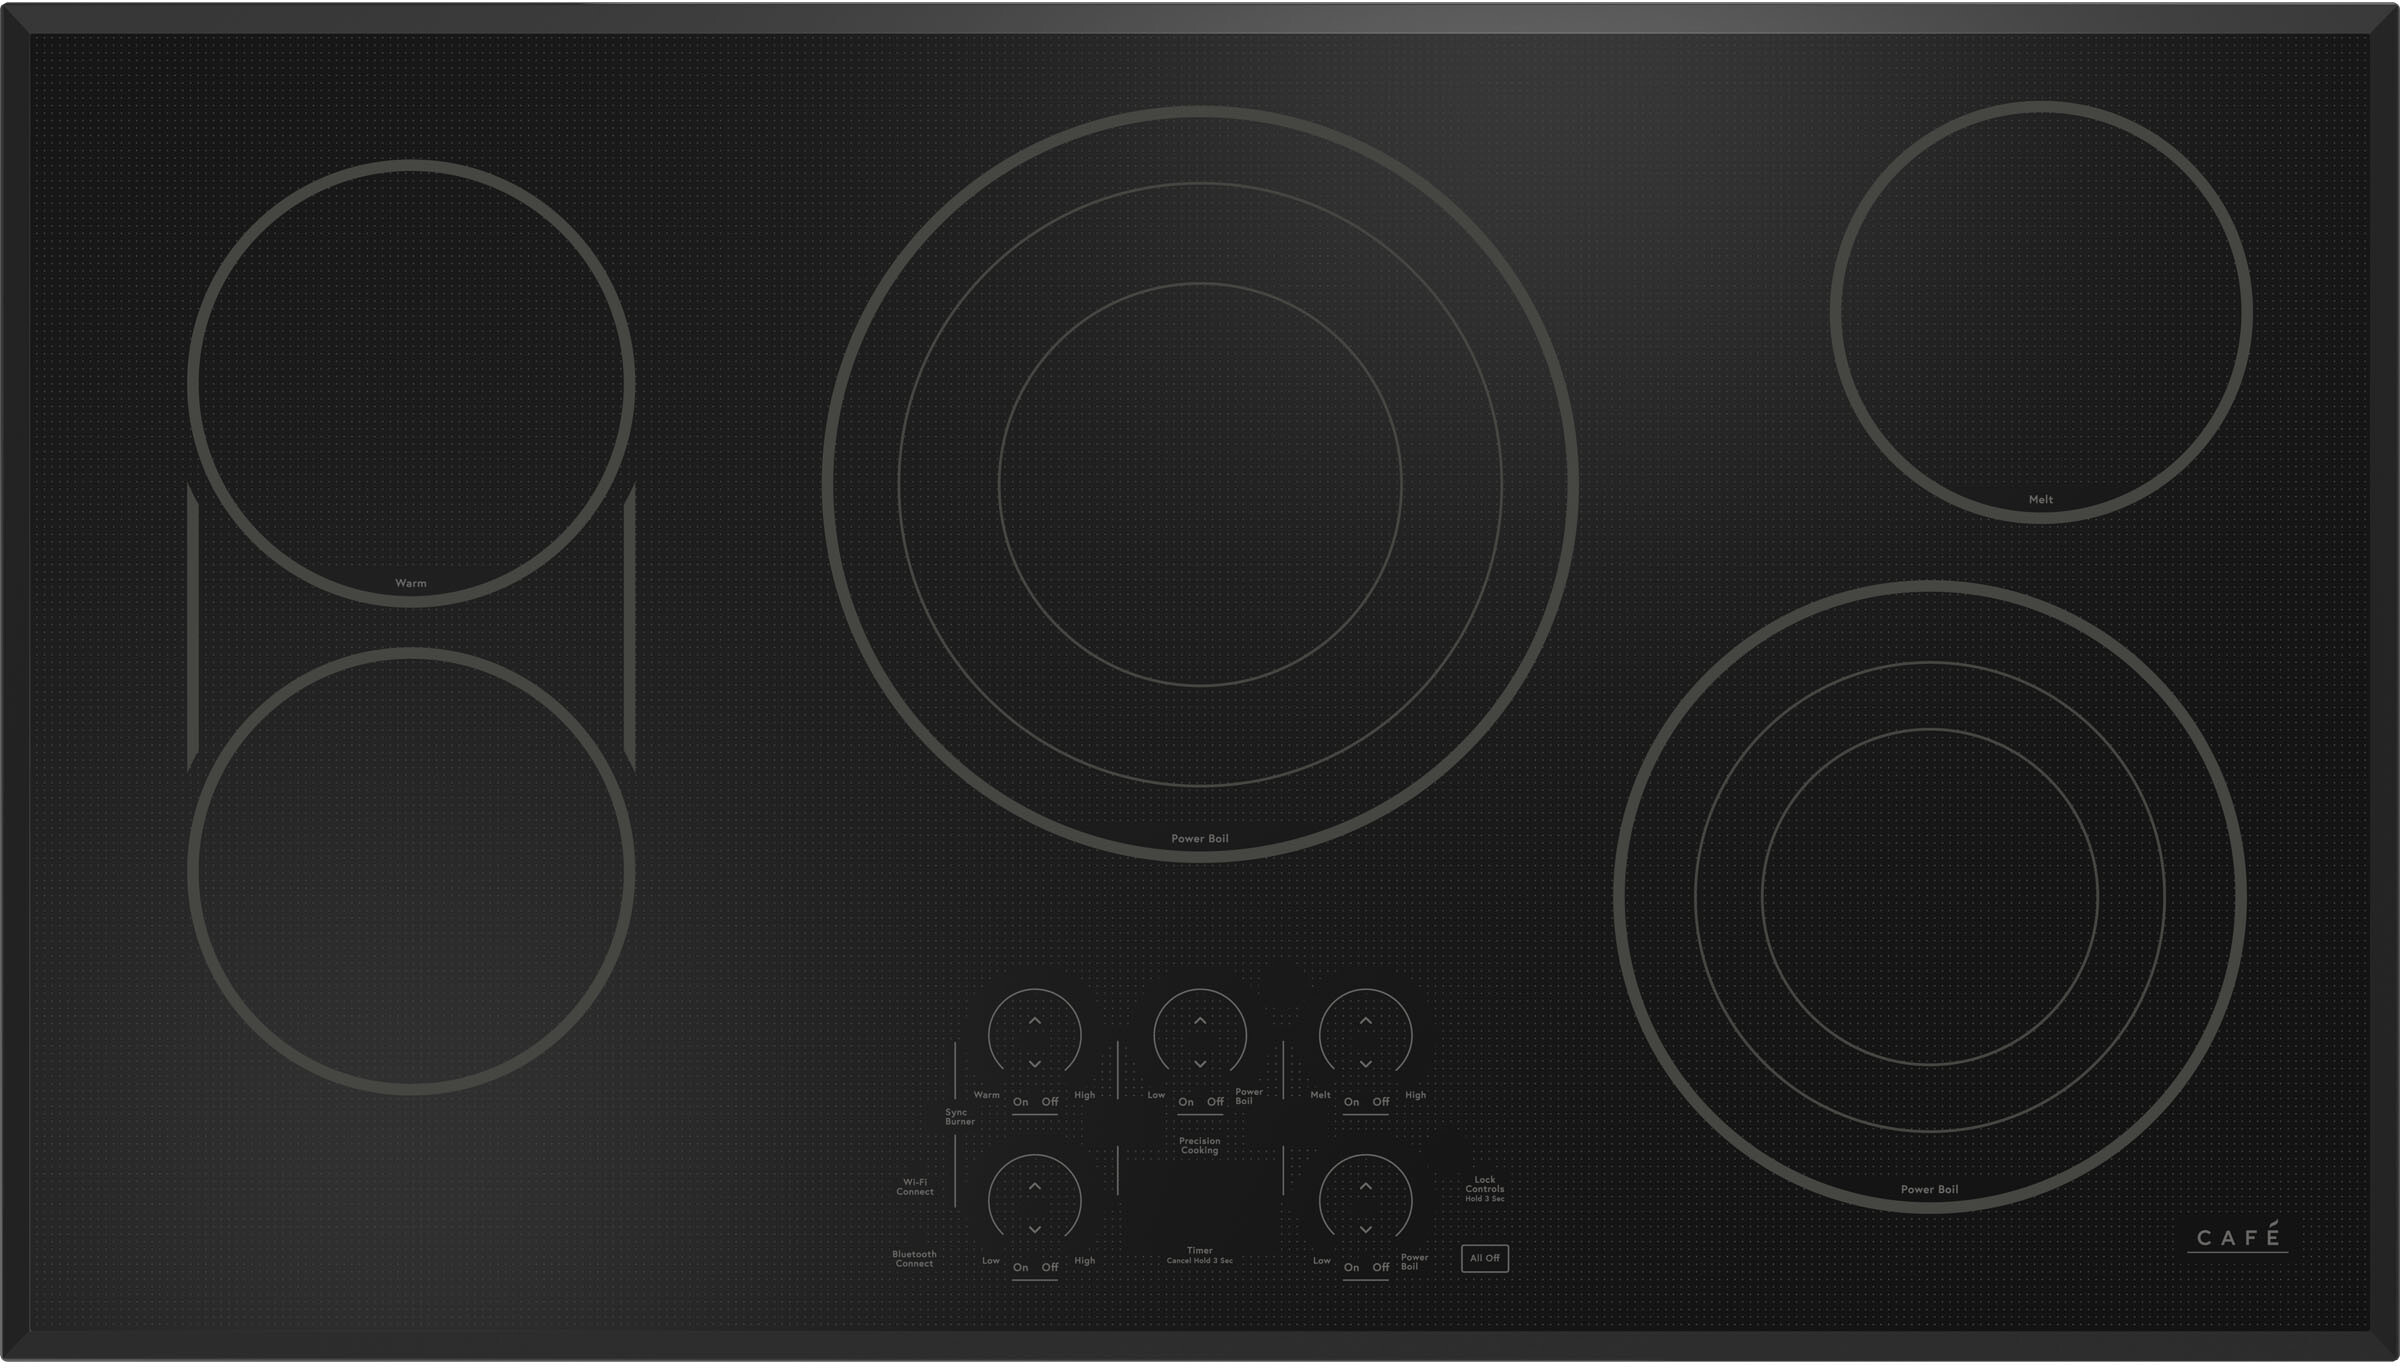 36"" Electric Drop-In Cooktop - Cafe CEP90361TBB